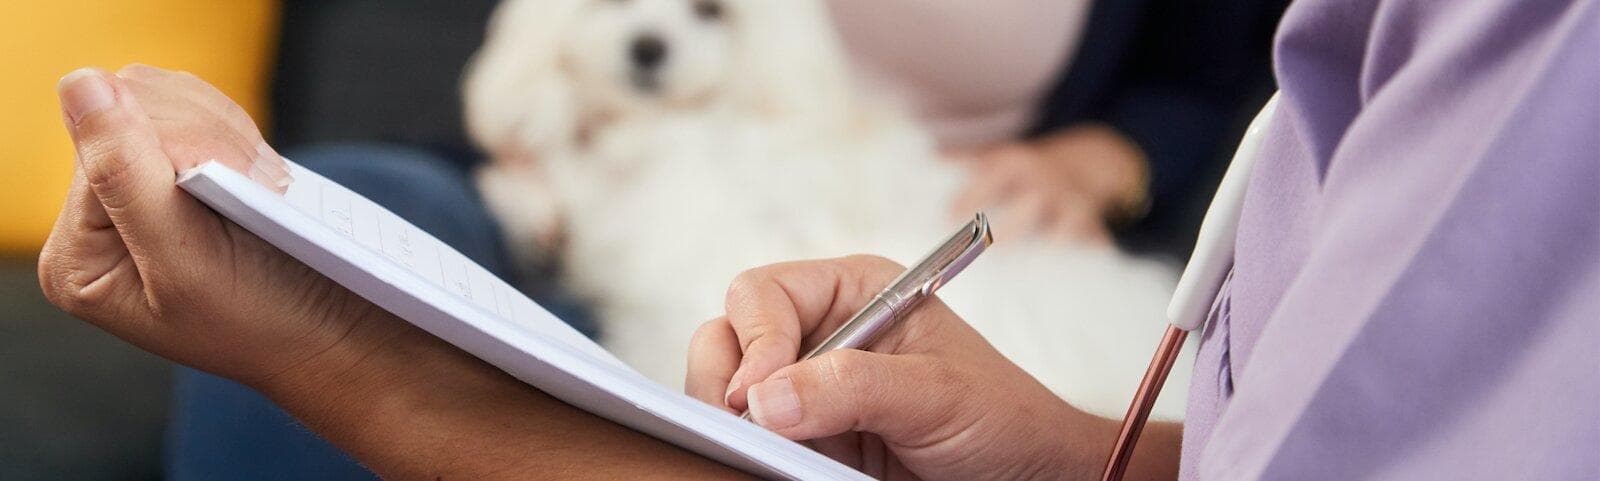 Vitality Veterinary Services forms